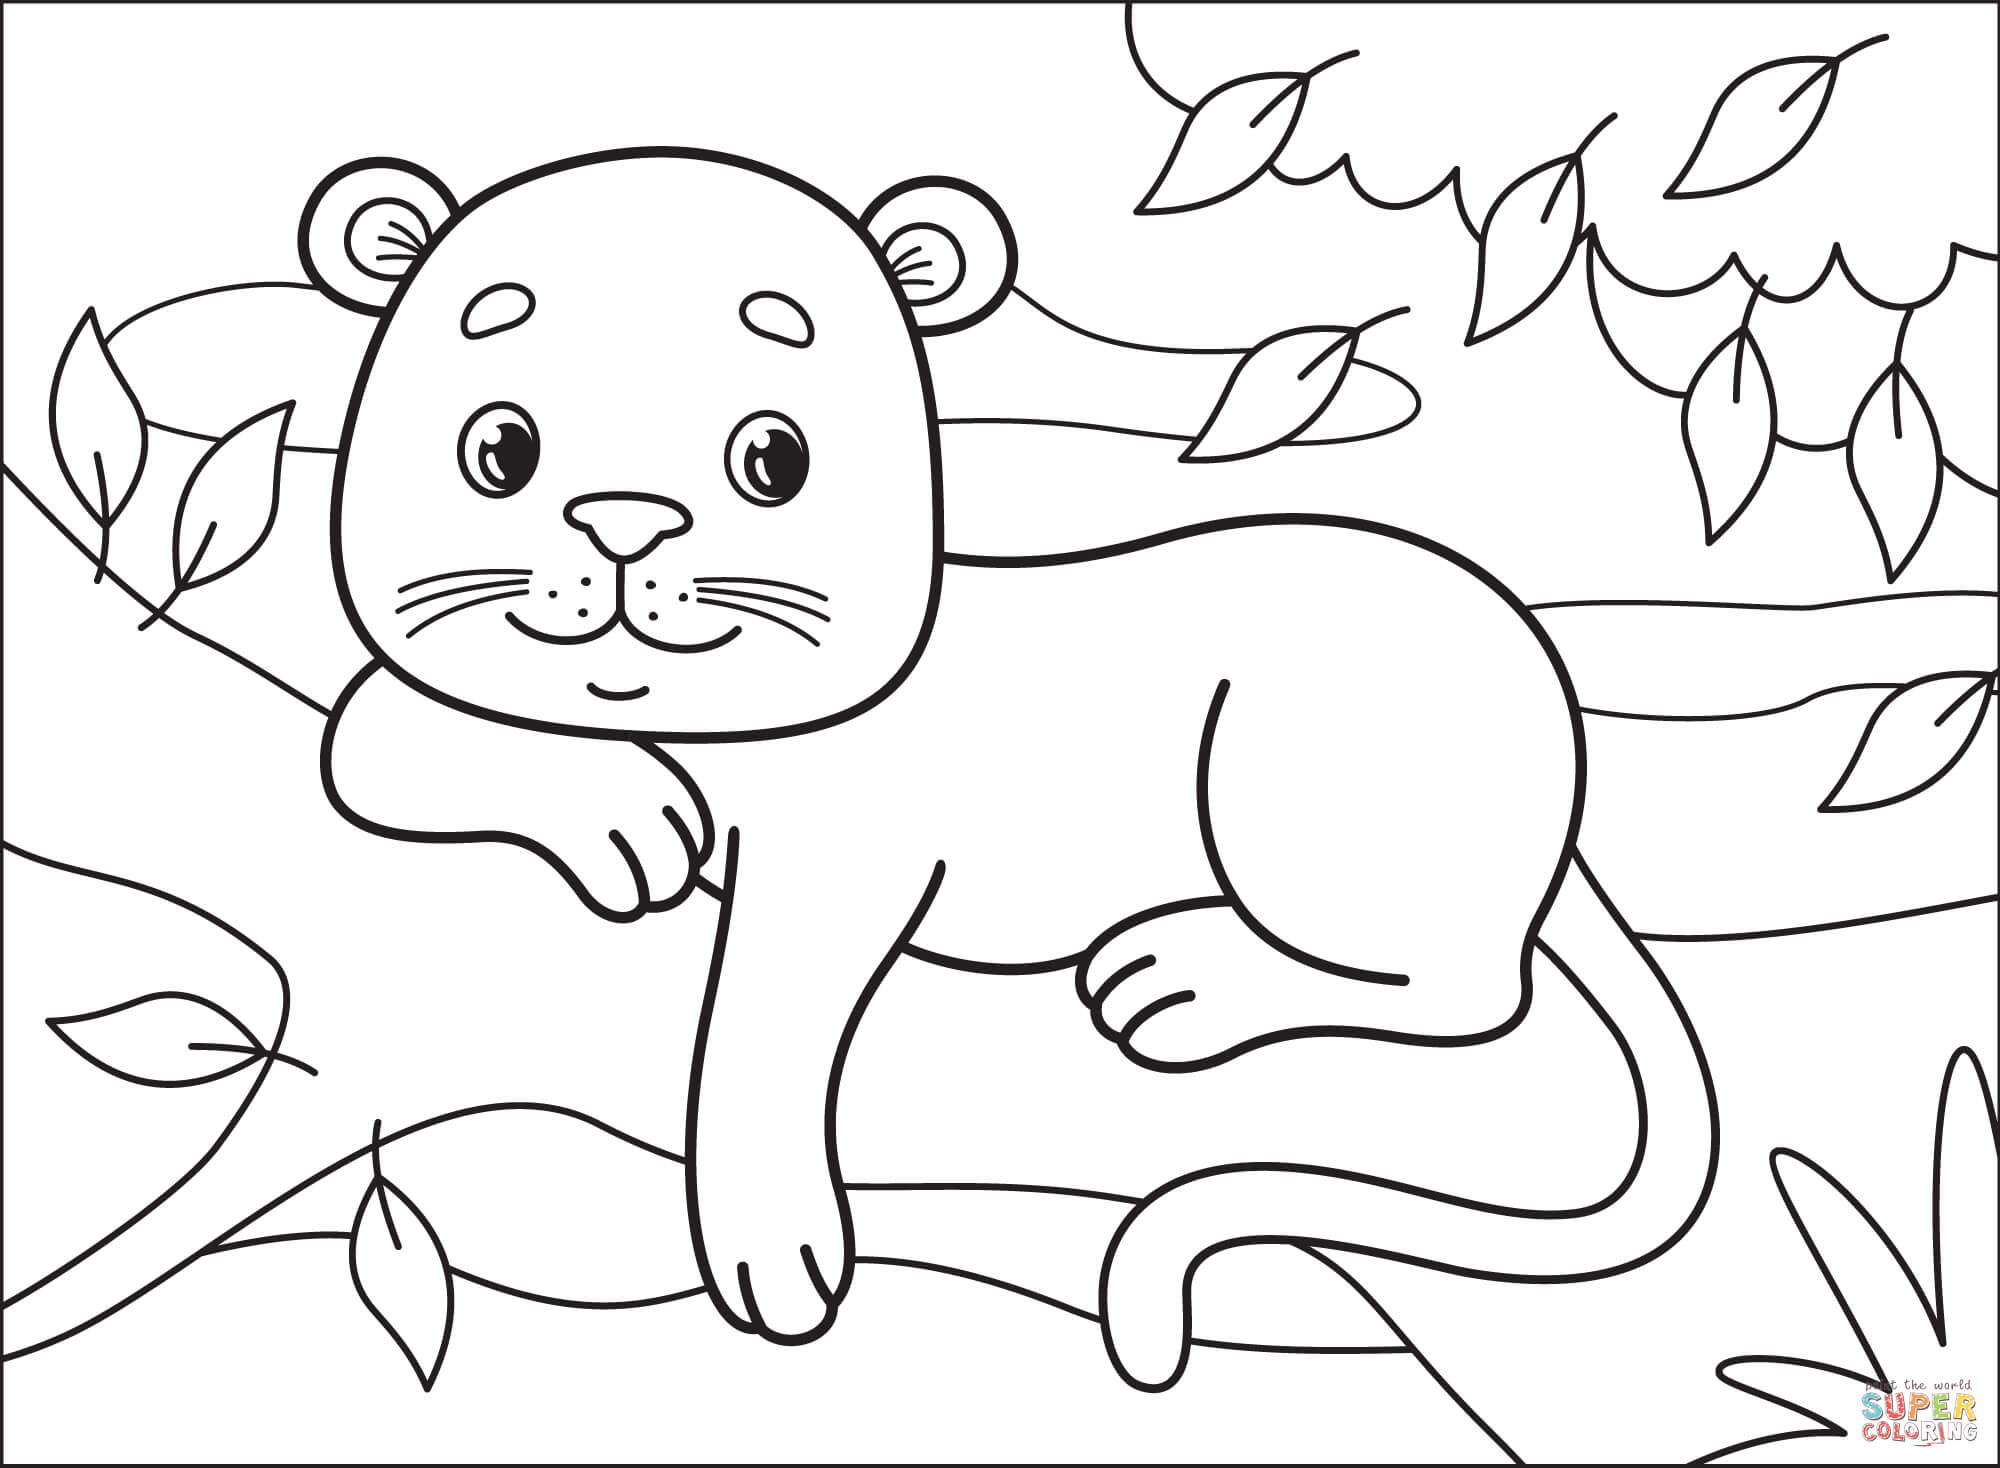 Panther coloring page free printable coloring pages